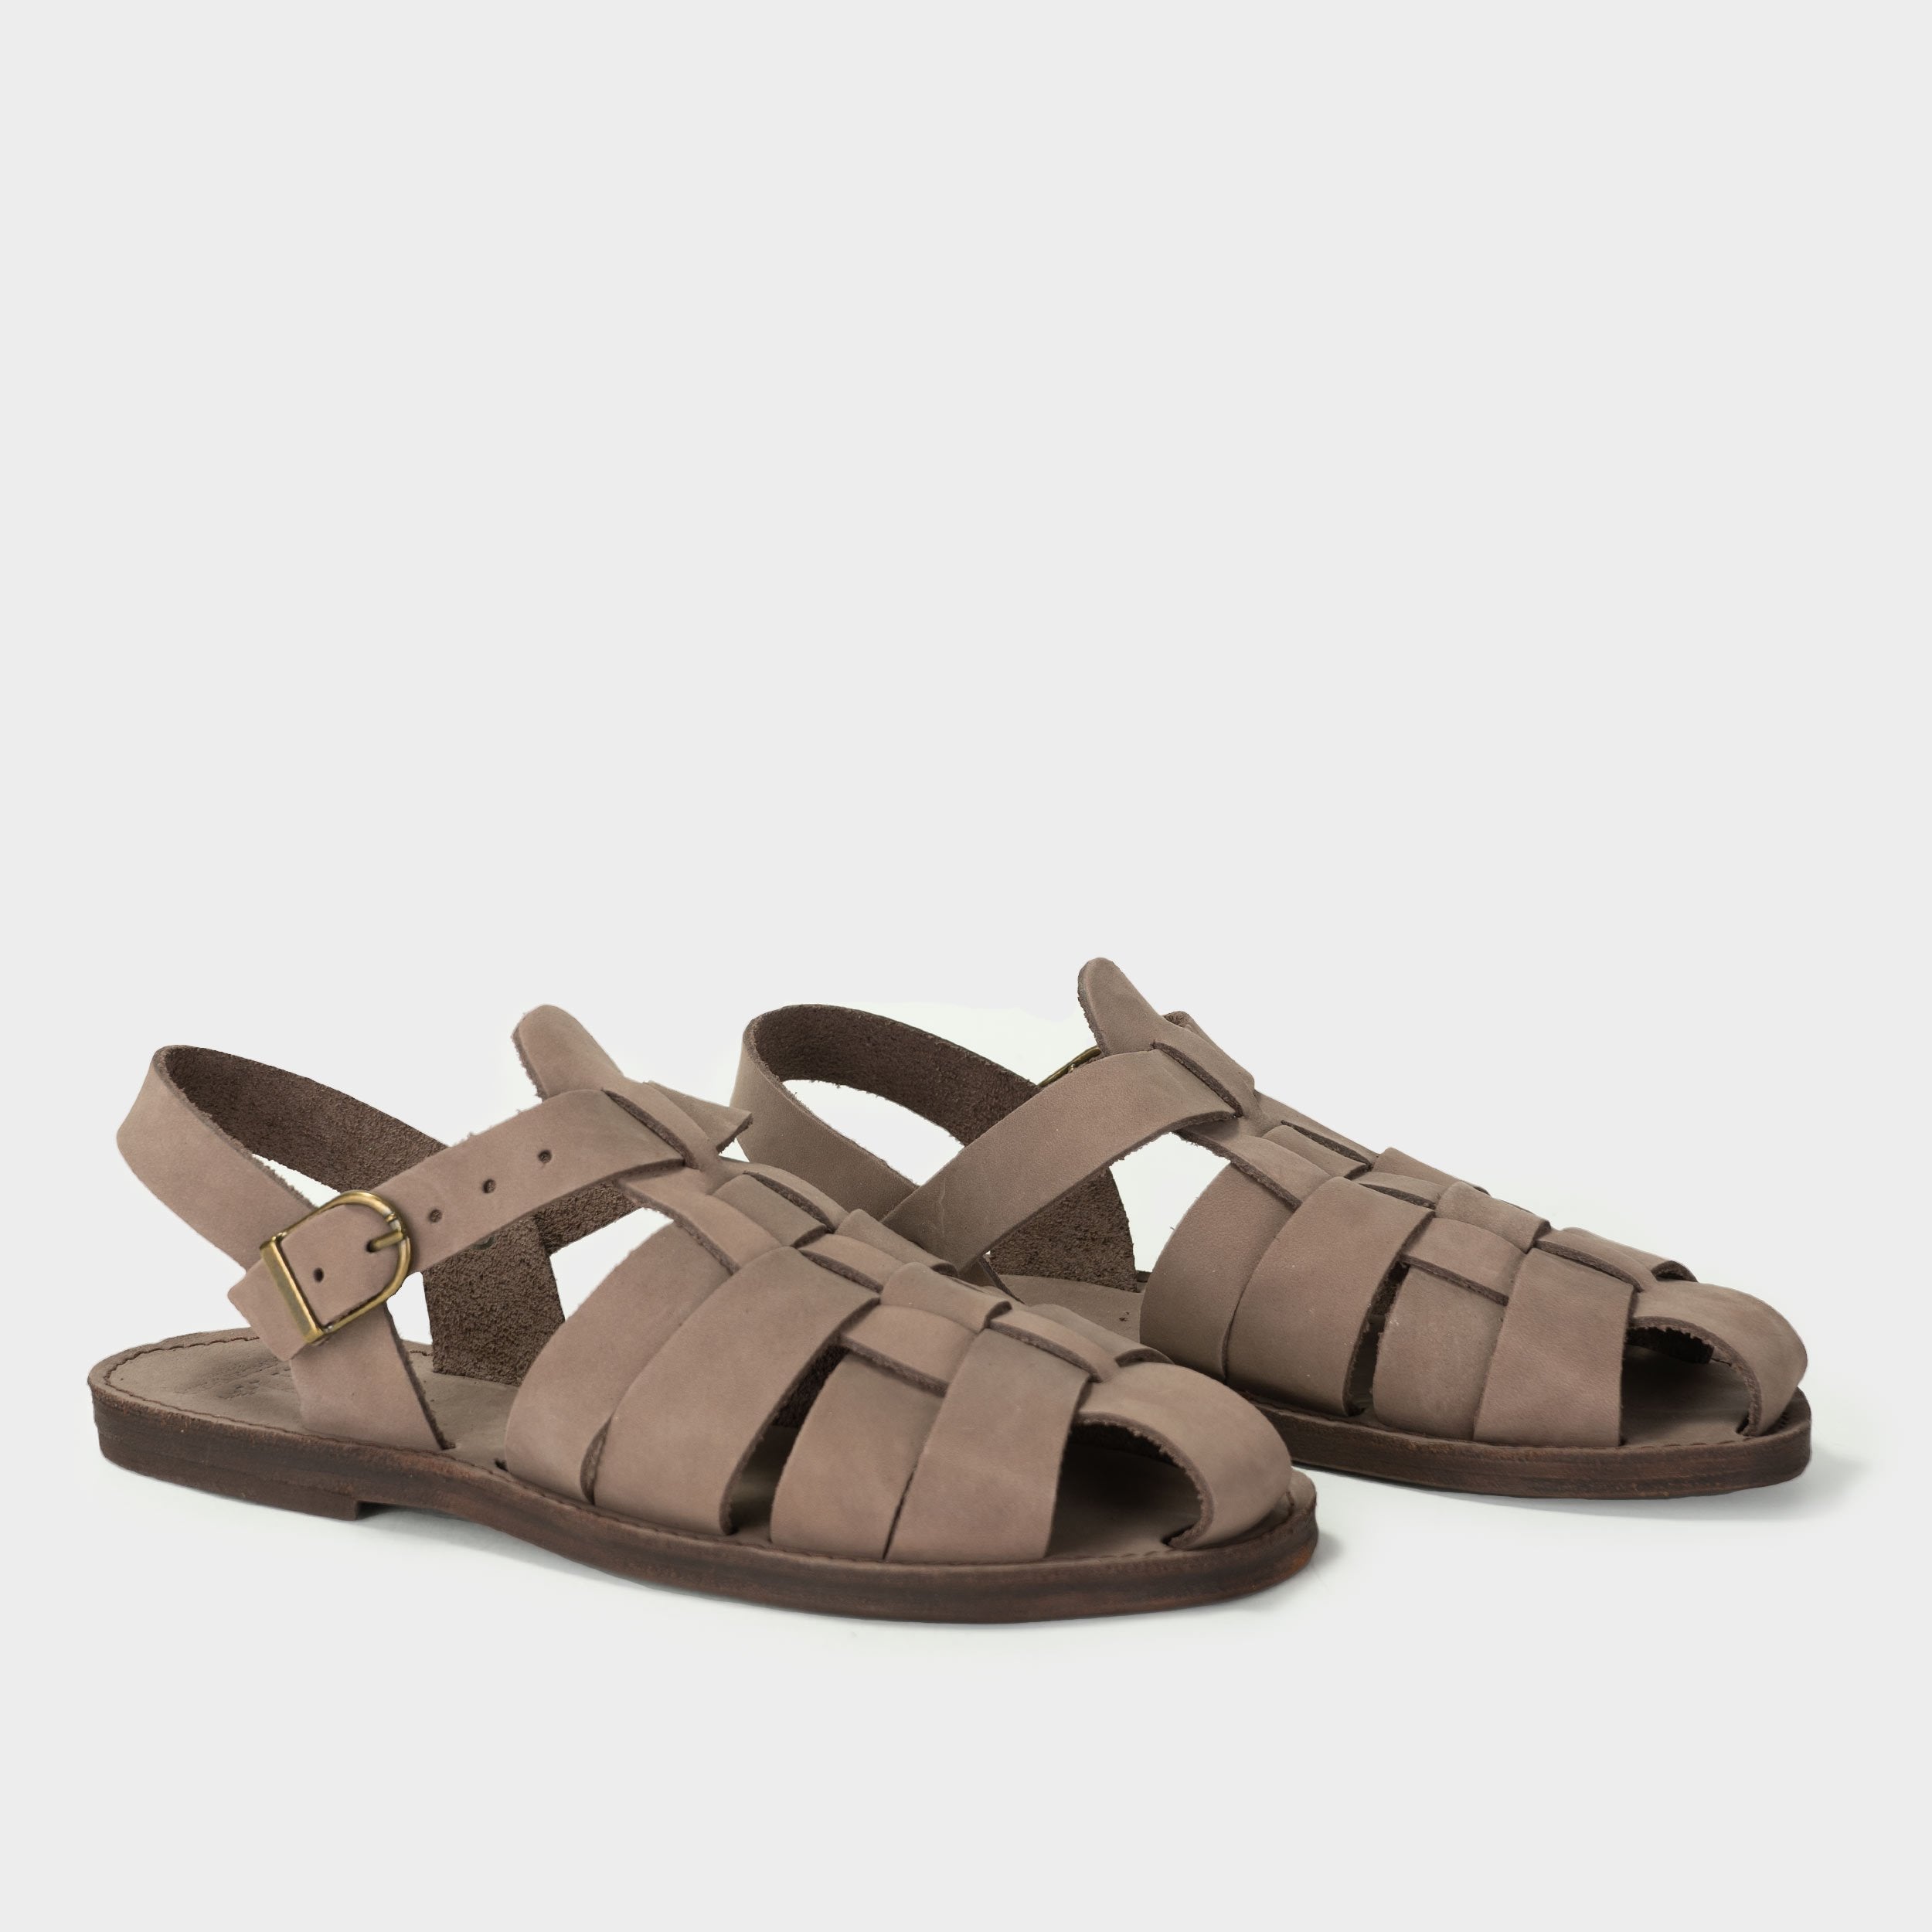 Leather Fisherman Sandals, French Fisherman Sandals, Tan Leather